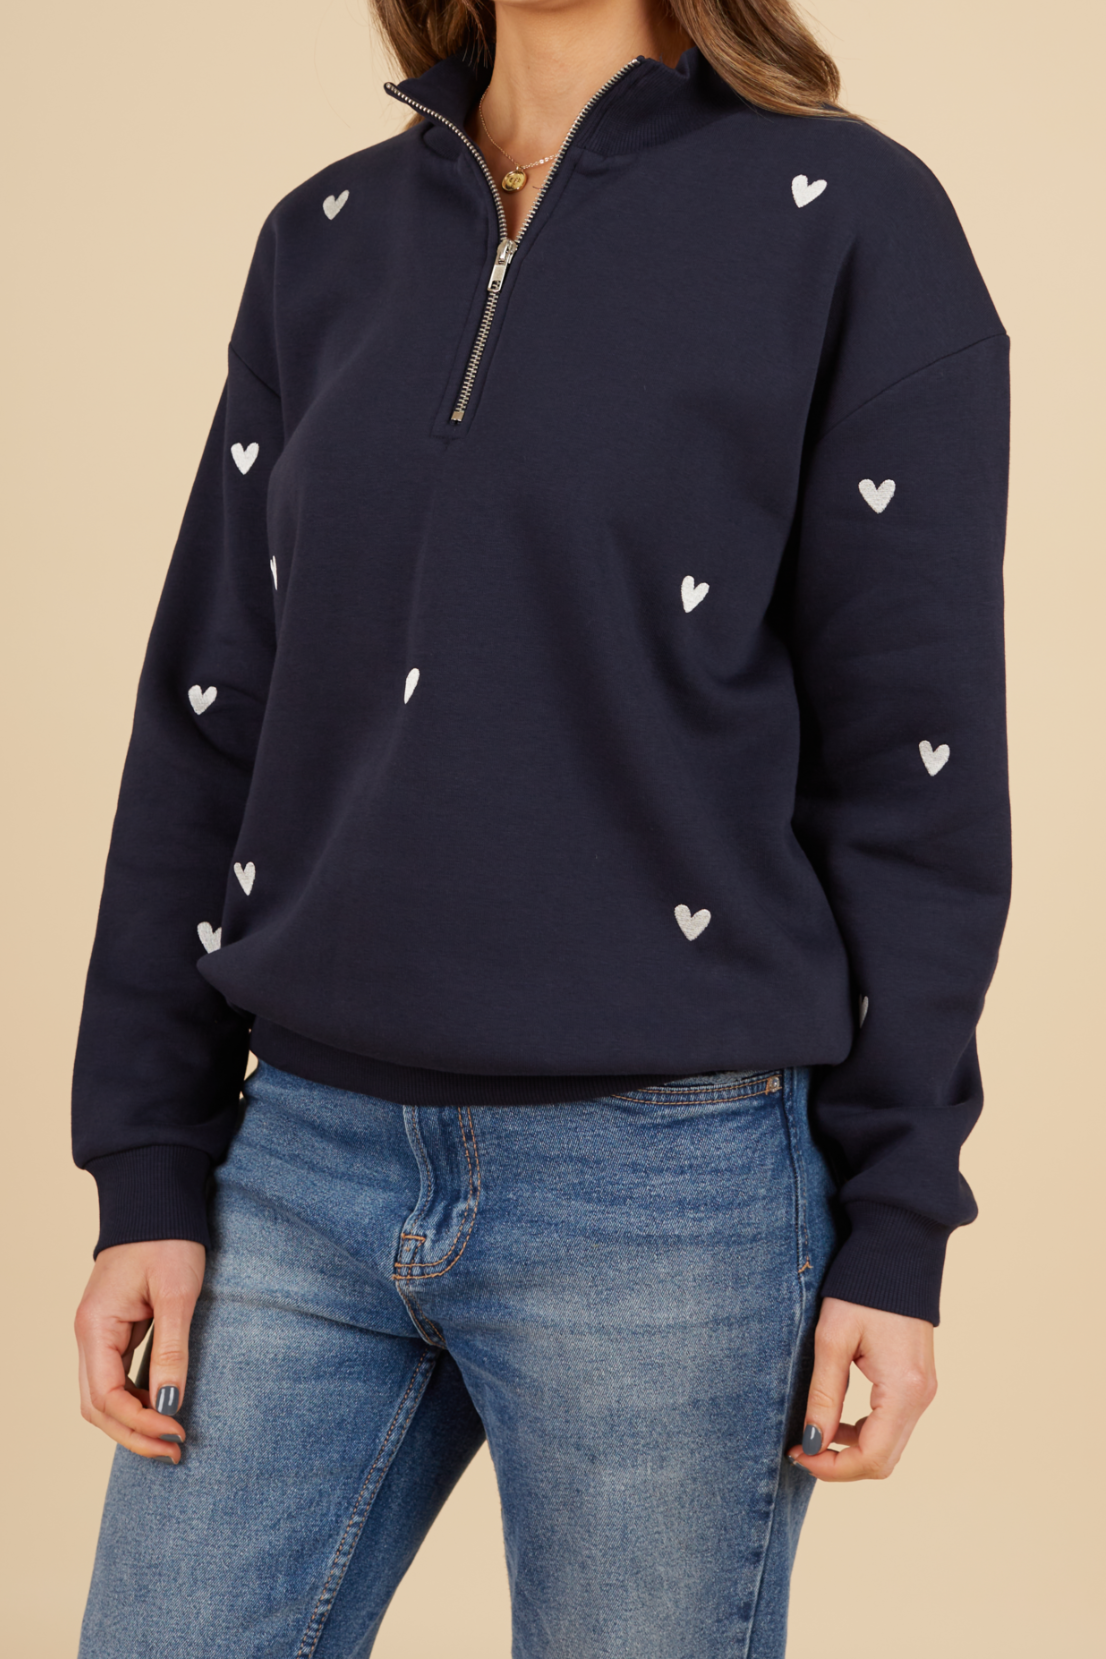 O&F Navy Heart Embroidered Half Zip Sweatshirt – Olive and Frank